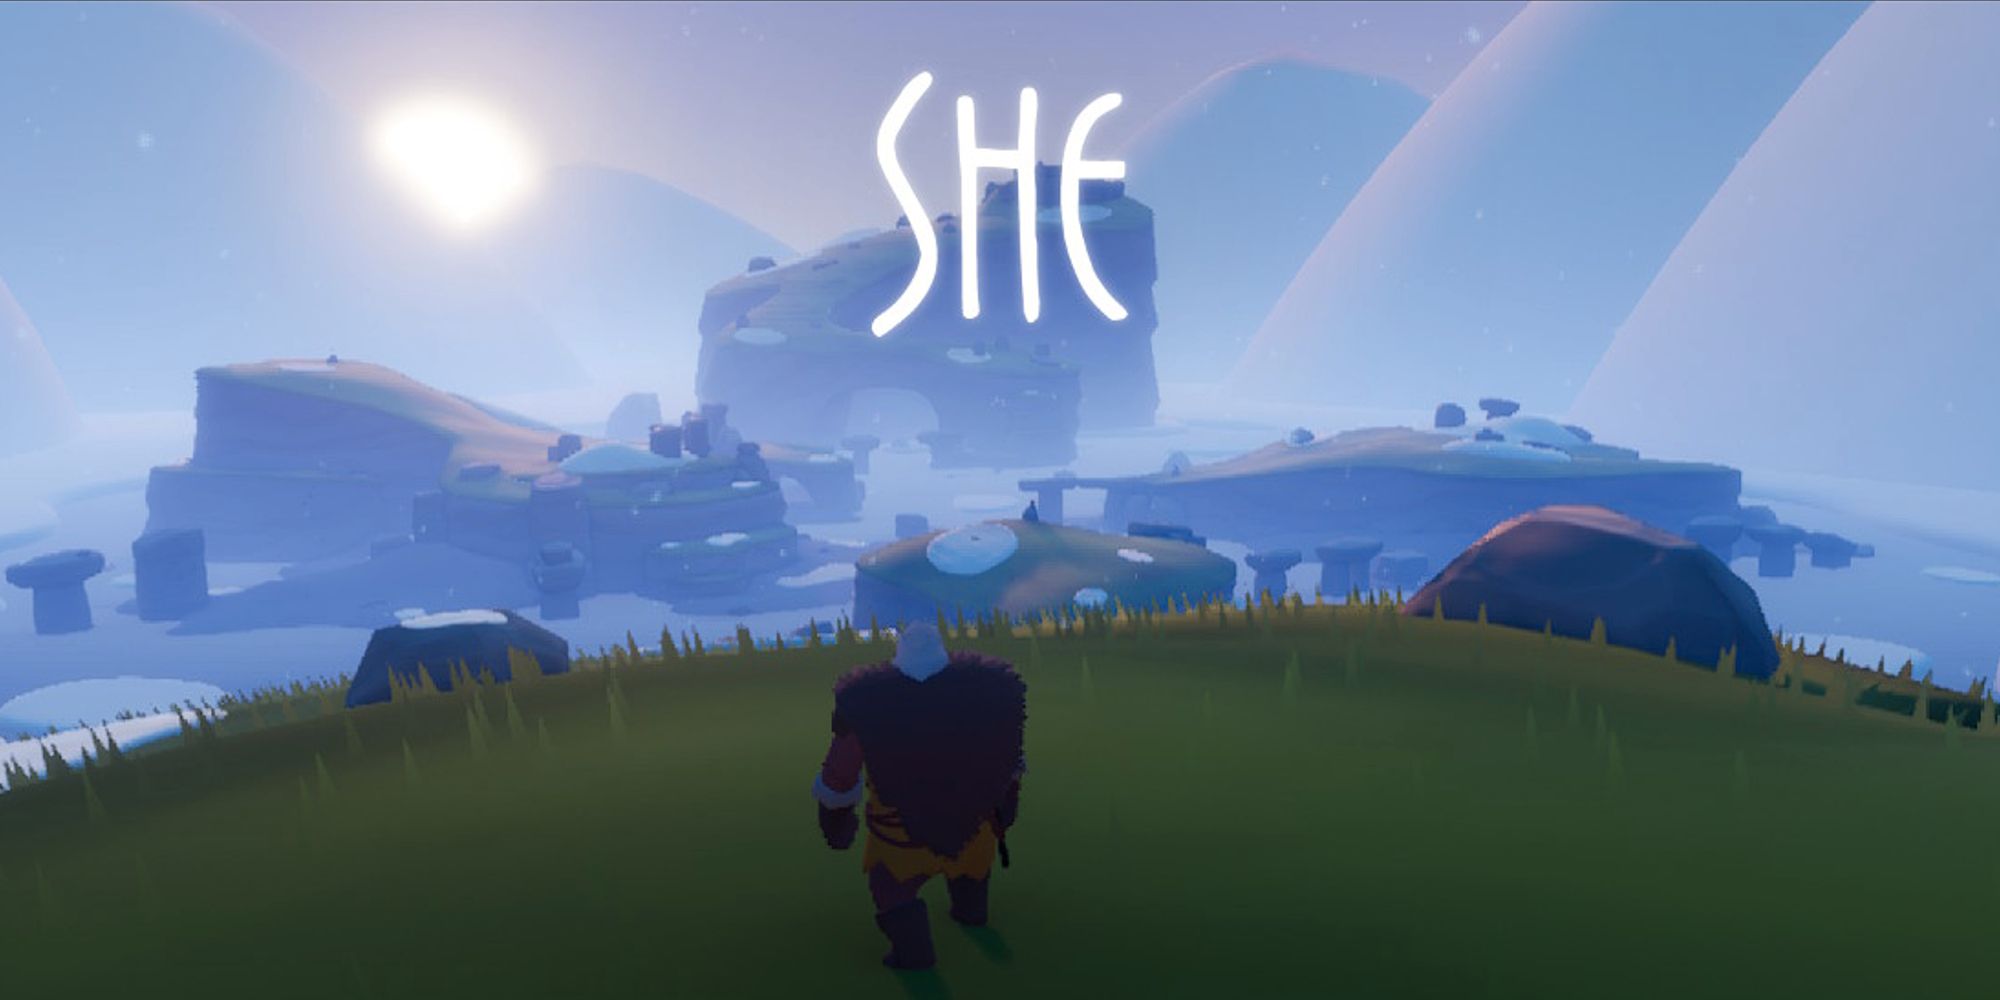 main character standing on grassy hill for first level titled she